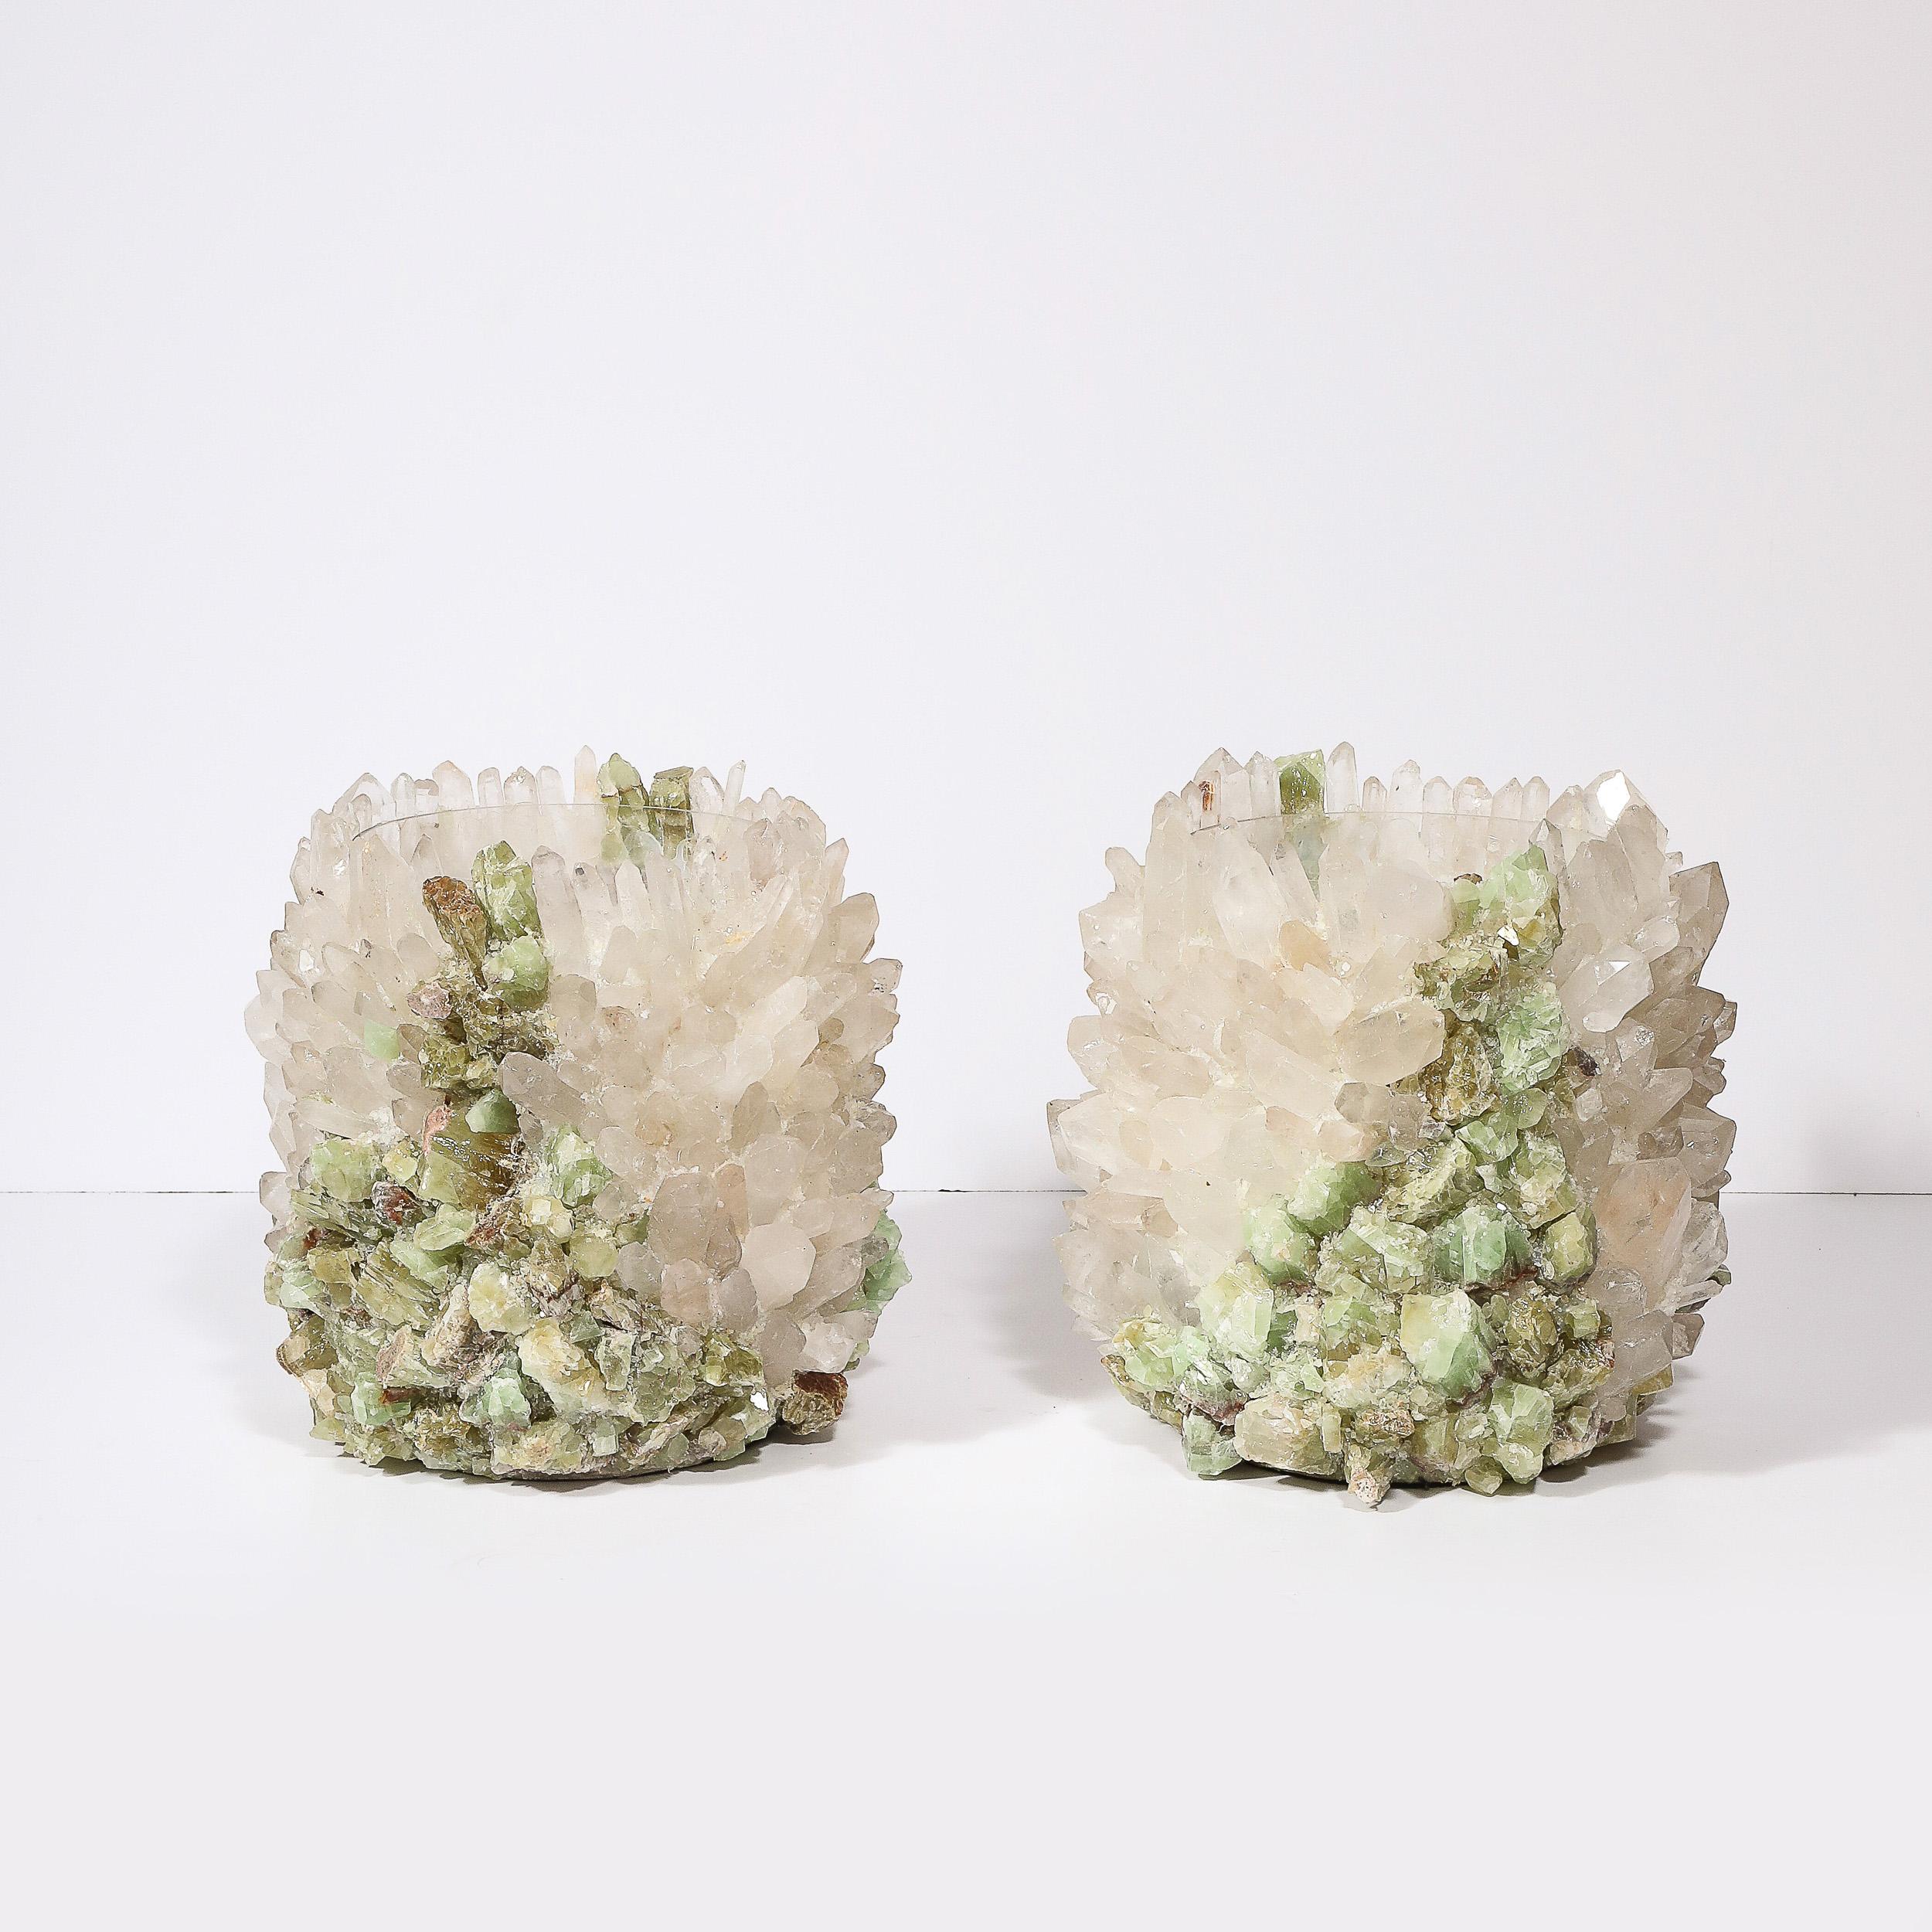 These powerfully scaled and materially exquisite Modernist Quartz Crystal and Green Apophyllite Hurricane Candleholders originate from Brazil during the latter half of the 20th Century. Brimming with detail and stunning natural quality of the quartz